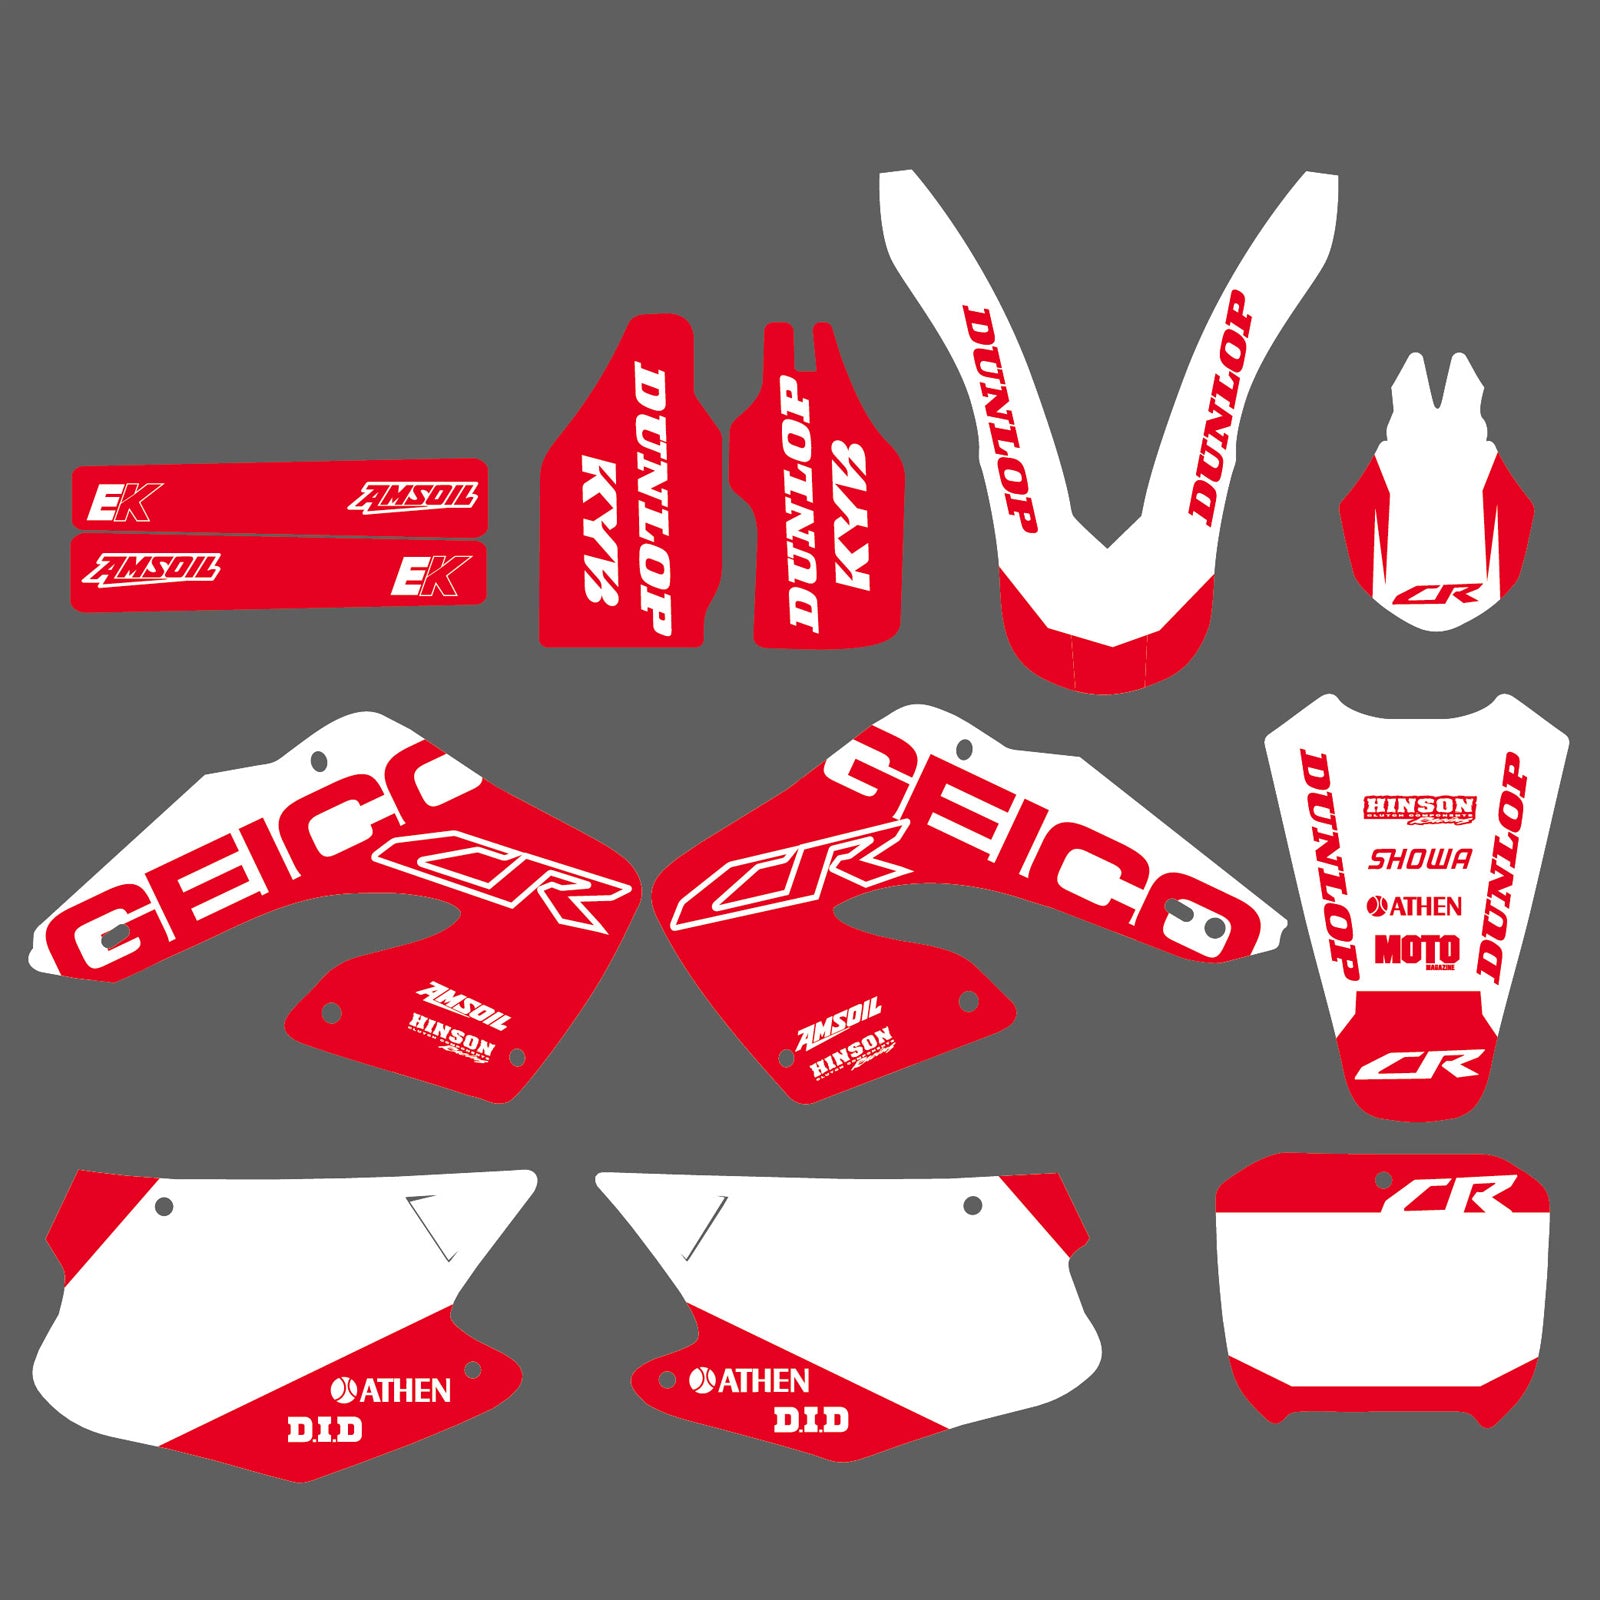 Motocross Graphics Decals Stickers For Honda CR125R CR250R 2000-2001